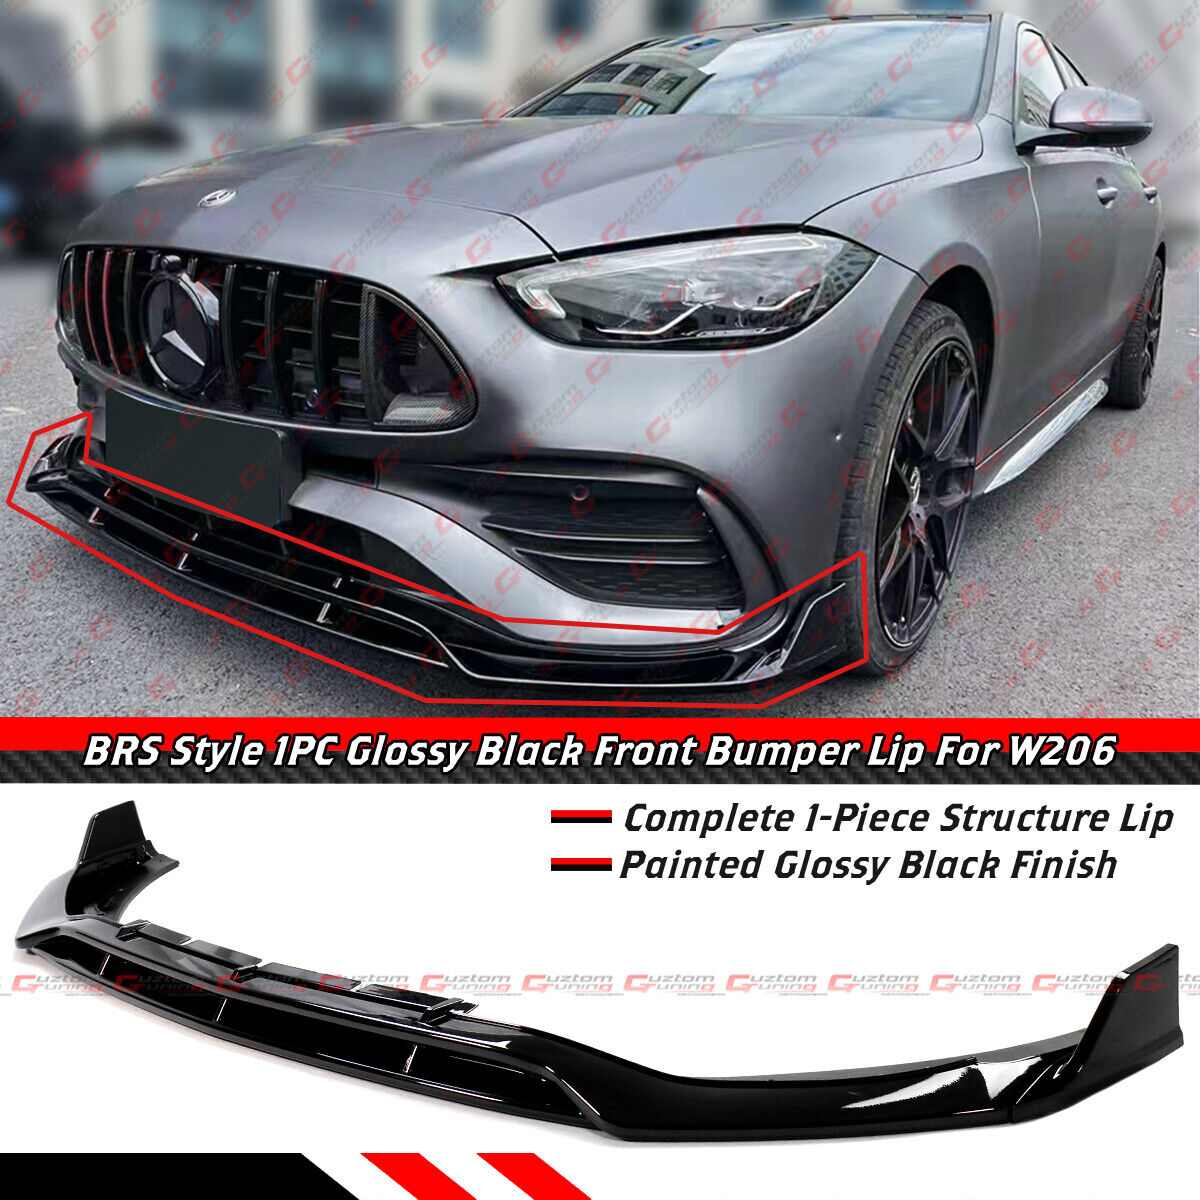 FOR 22-24 MERCEDES BENZ C CLASS W206 AMG BRS STYLE GLOSS BLACK FRONT BUMPER LIP